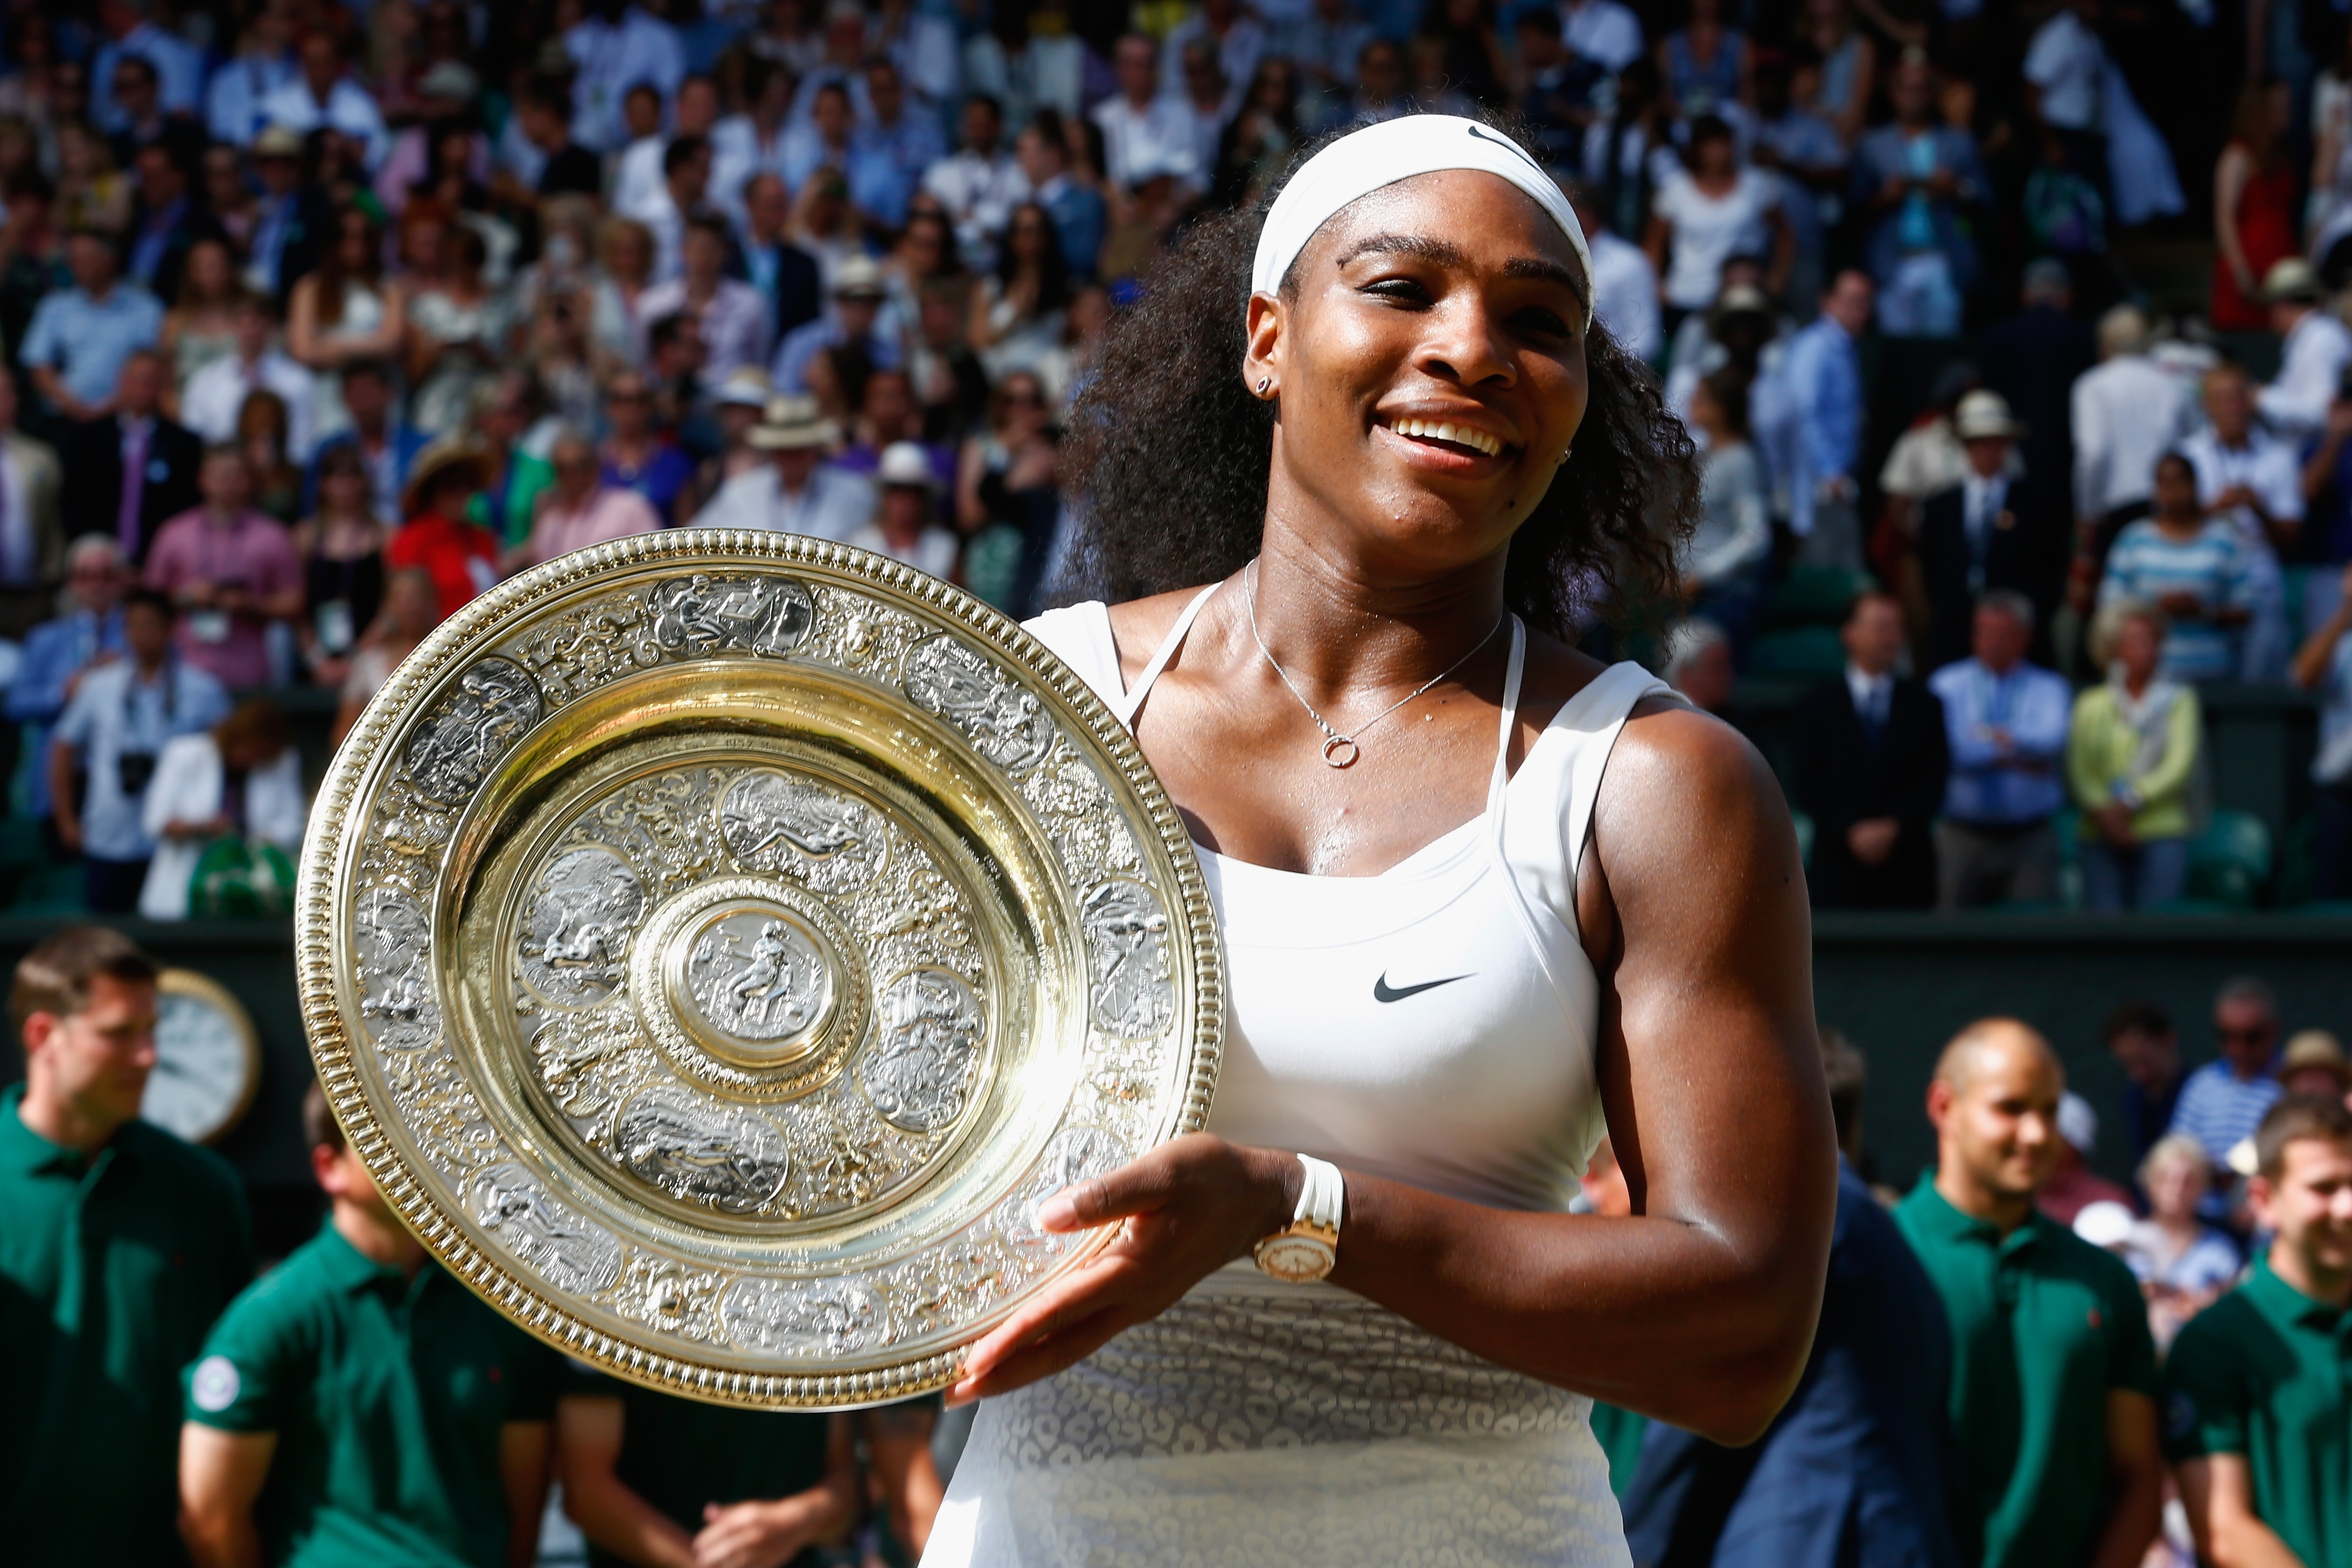 LONDON, ENGLAND - JULY 11: Serena Williams of United States celebrates with the trophy after winning the Final of the Ladies Singles against Garbine Muguruza of Spain during the day twelve of the Wimbledon Lawn Tennis Championships at the All England Lawn Tennis and Croquet Club on July 11, 2015 in London, England. (Photo by Julian Finney/Getty Images)